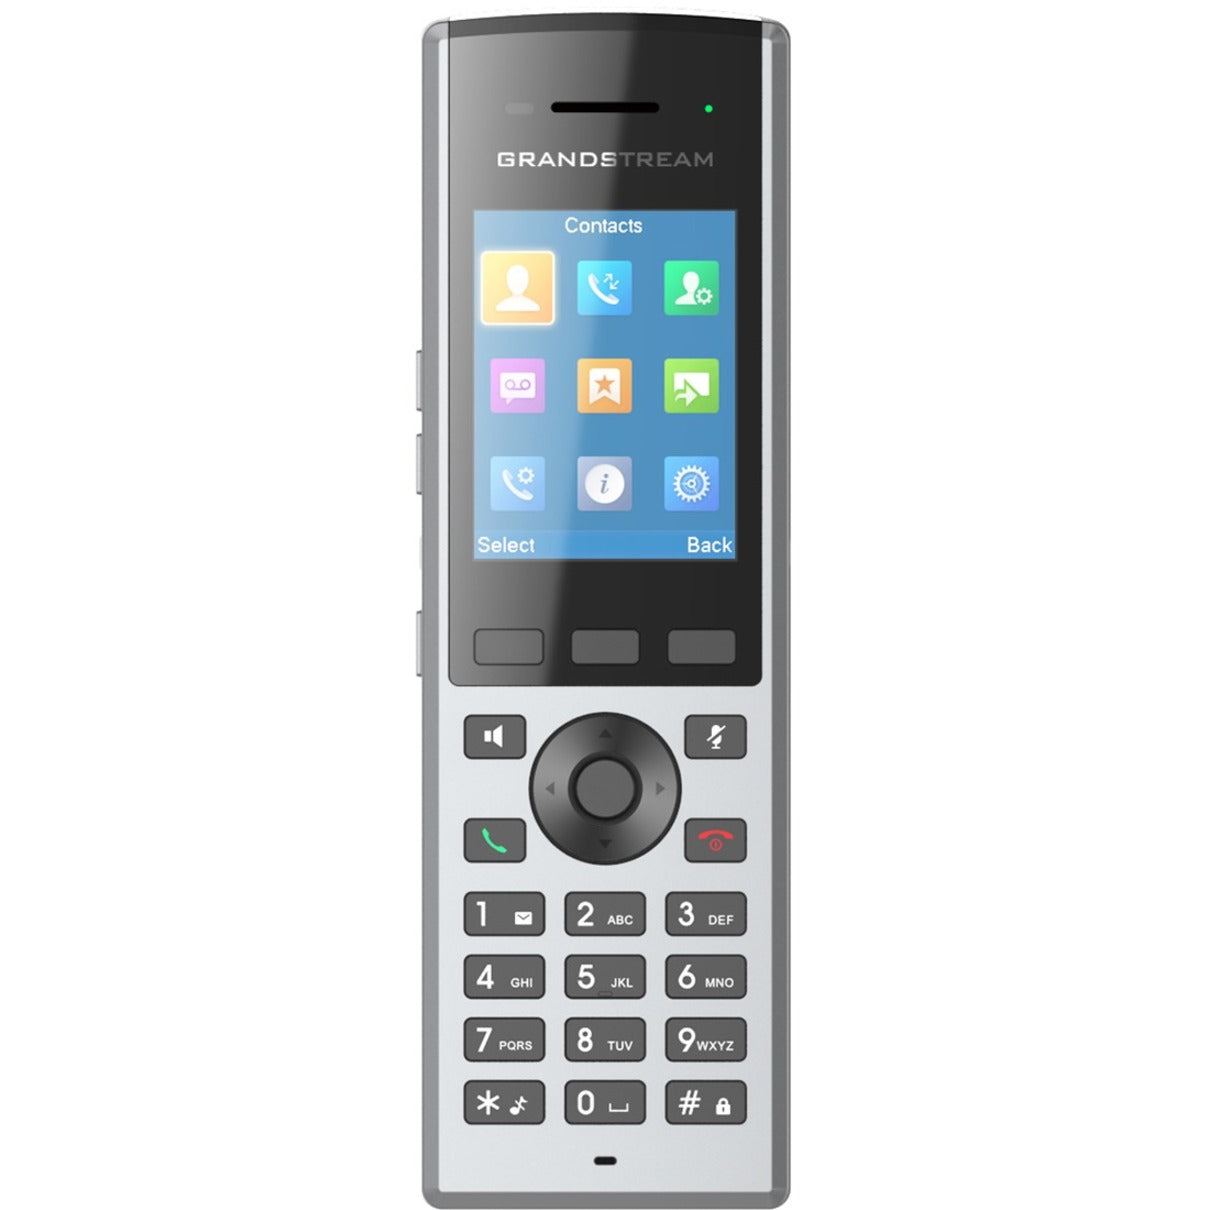 Grandstream DP730 DECT Cordless HD Handset for Mobility, 2.4" TFT LCD Screen, Call Pick-up, Conference Call, Belt Clip